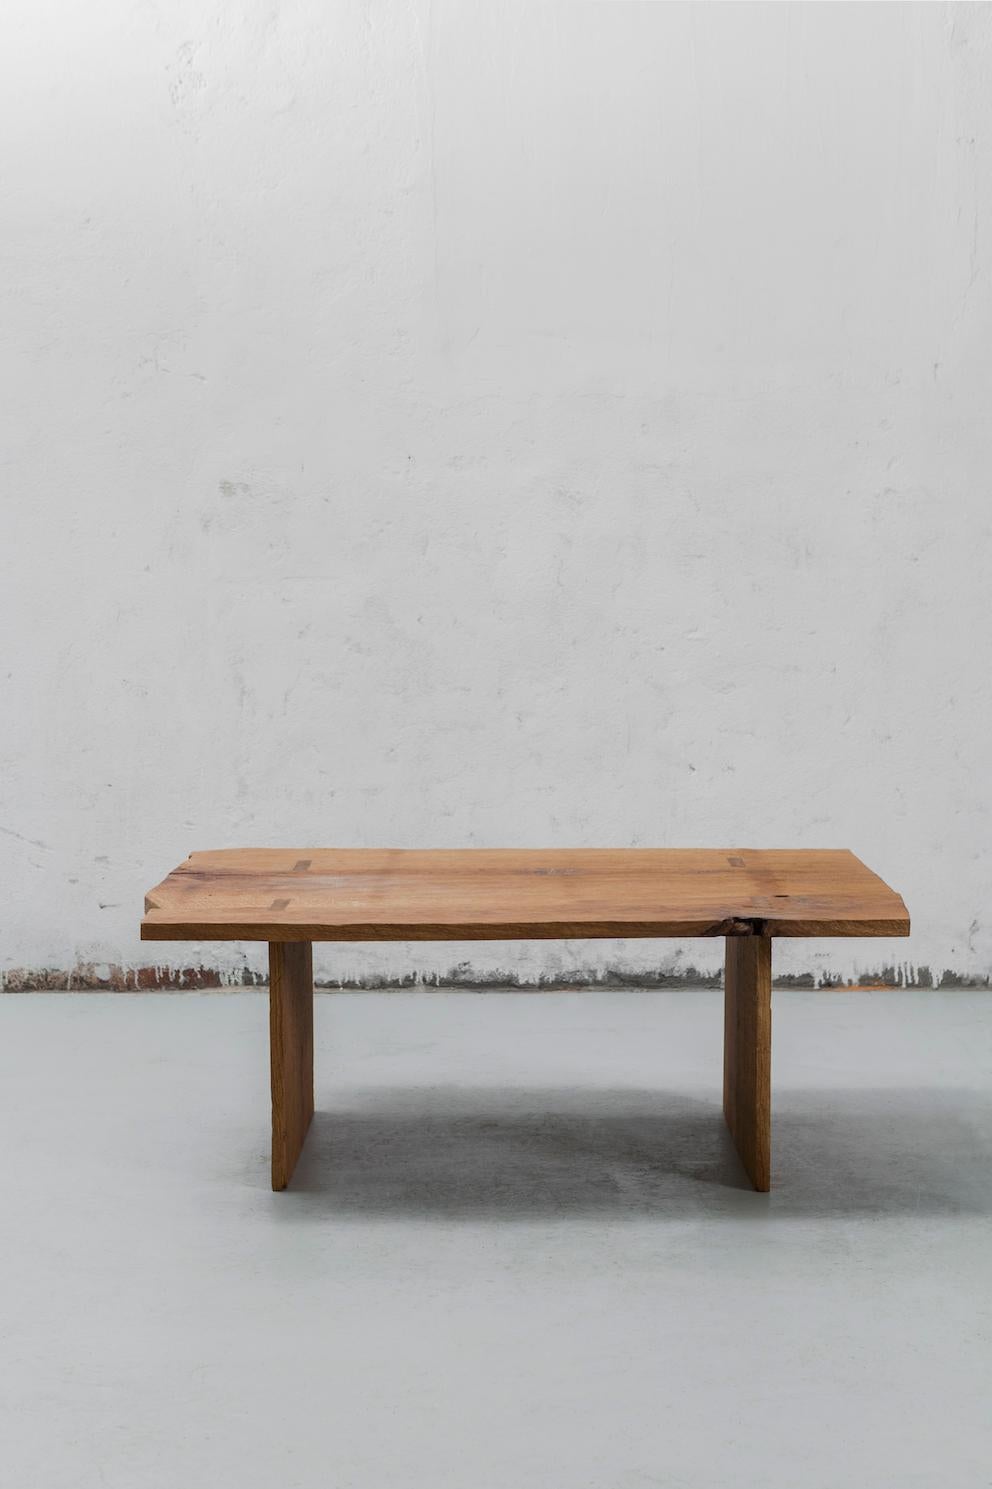 Coffee table made of solid oak (+ linseed oil)
Square: 105 x 105cm


SÓHA design studio conceives and produces furniture design and decorative objects in solid oak in an authentic style. Inspiration to create all these items comes from the Russian